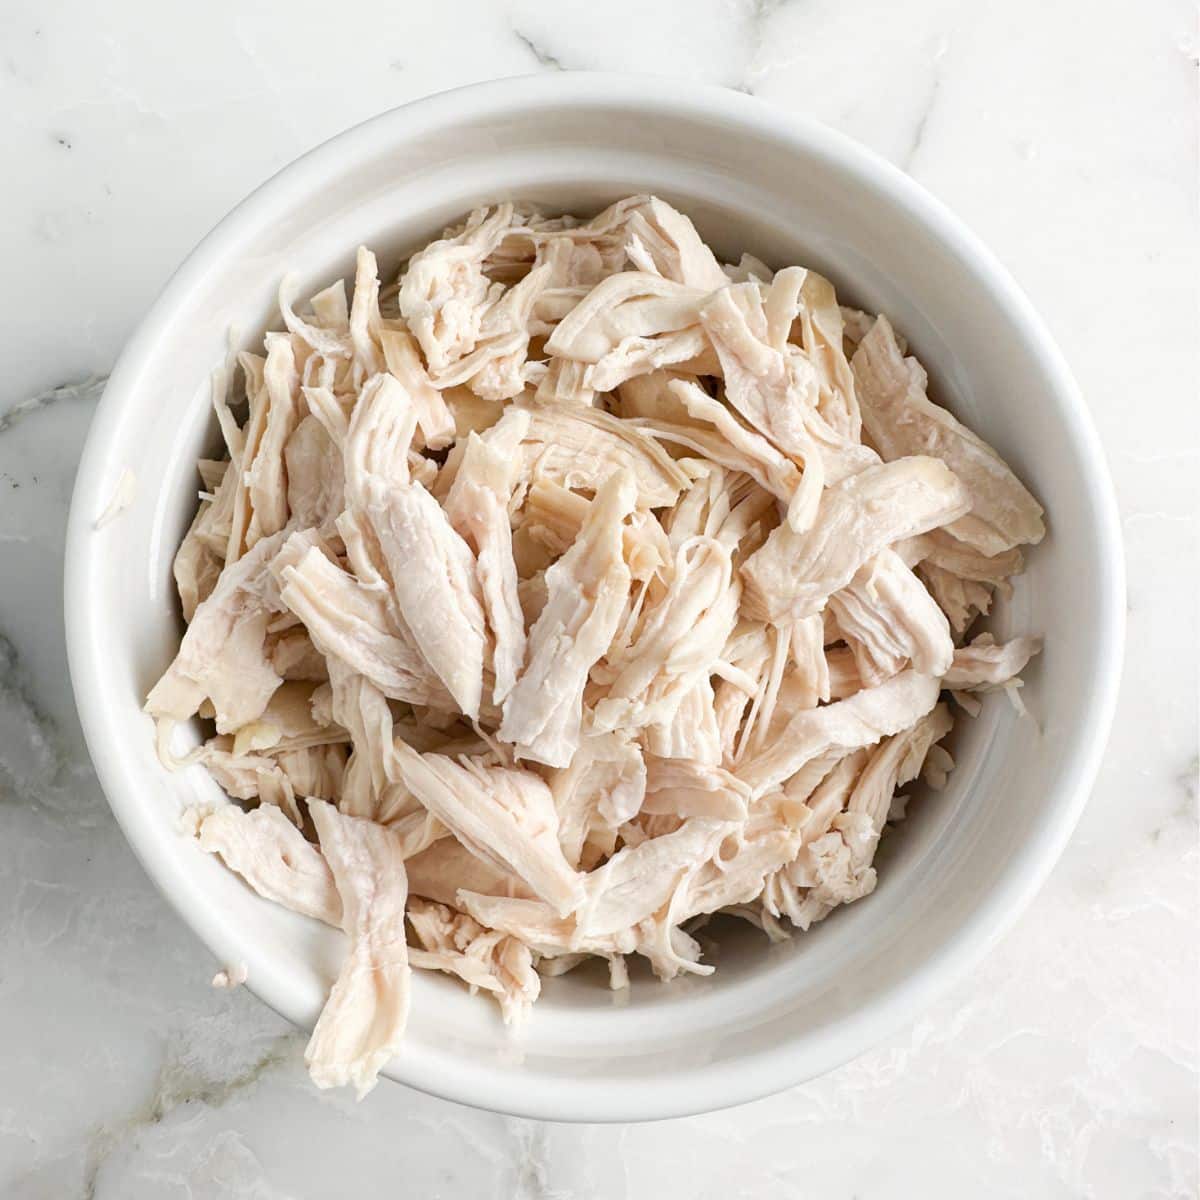 Bowl with shredded chicken.